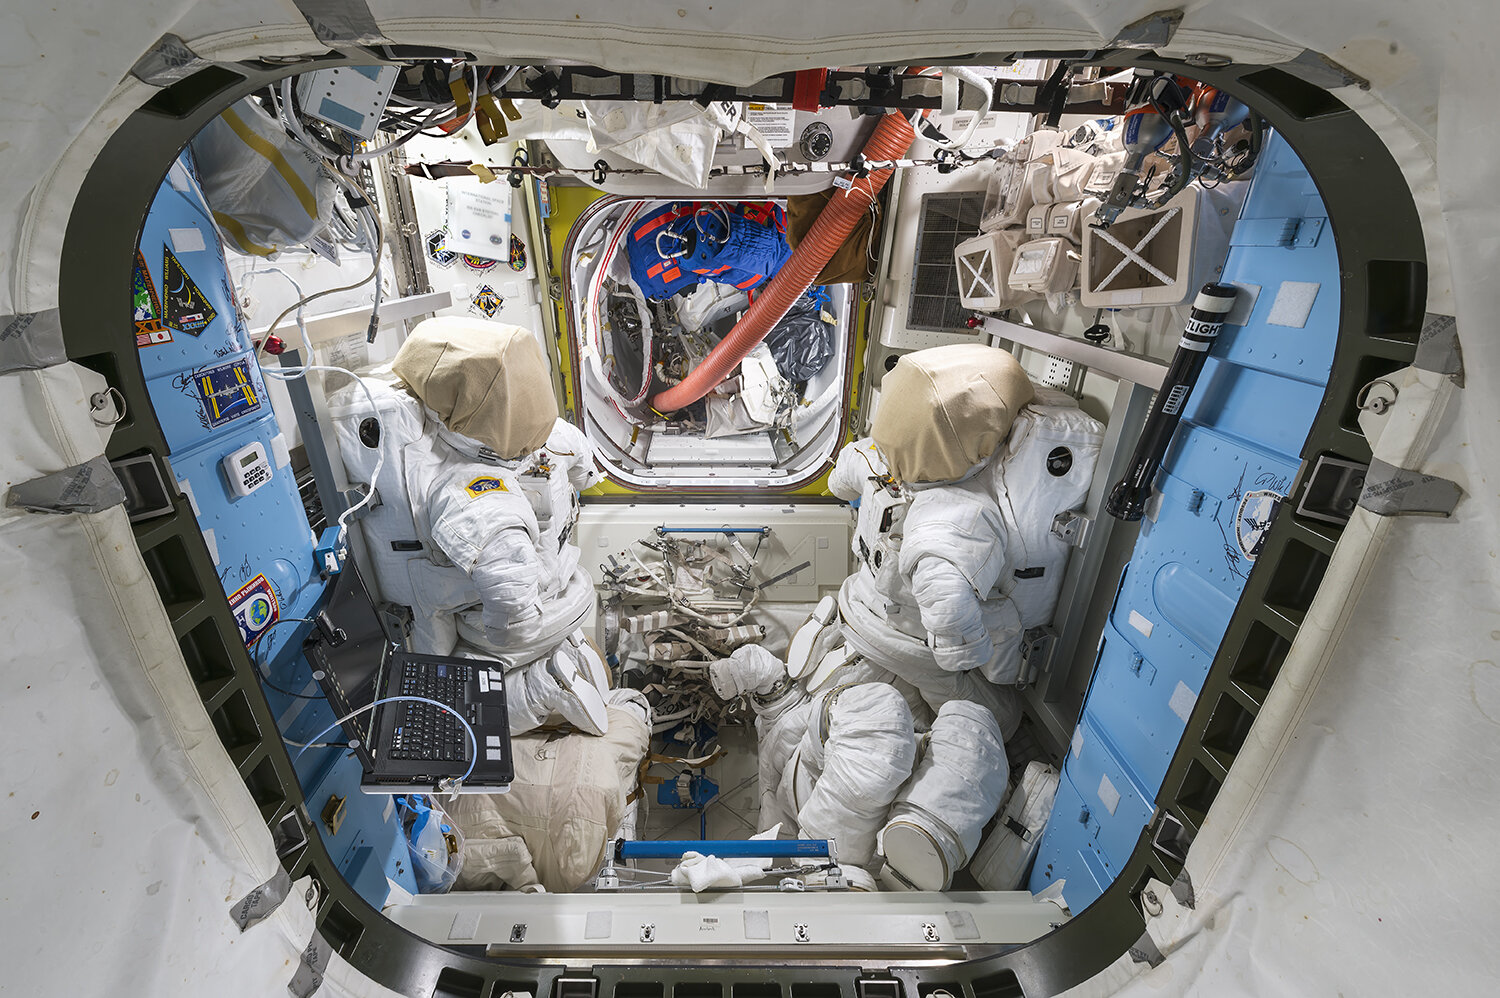 Starboard View through Port Hatch of Equipment Lock and Crew Lock with Extravehicular Activity Hardware